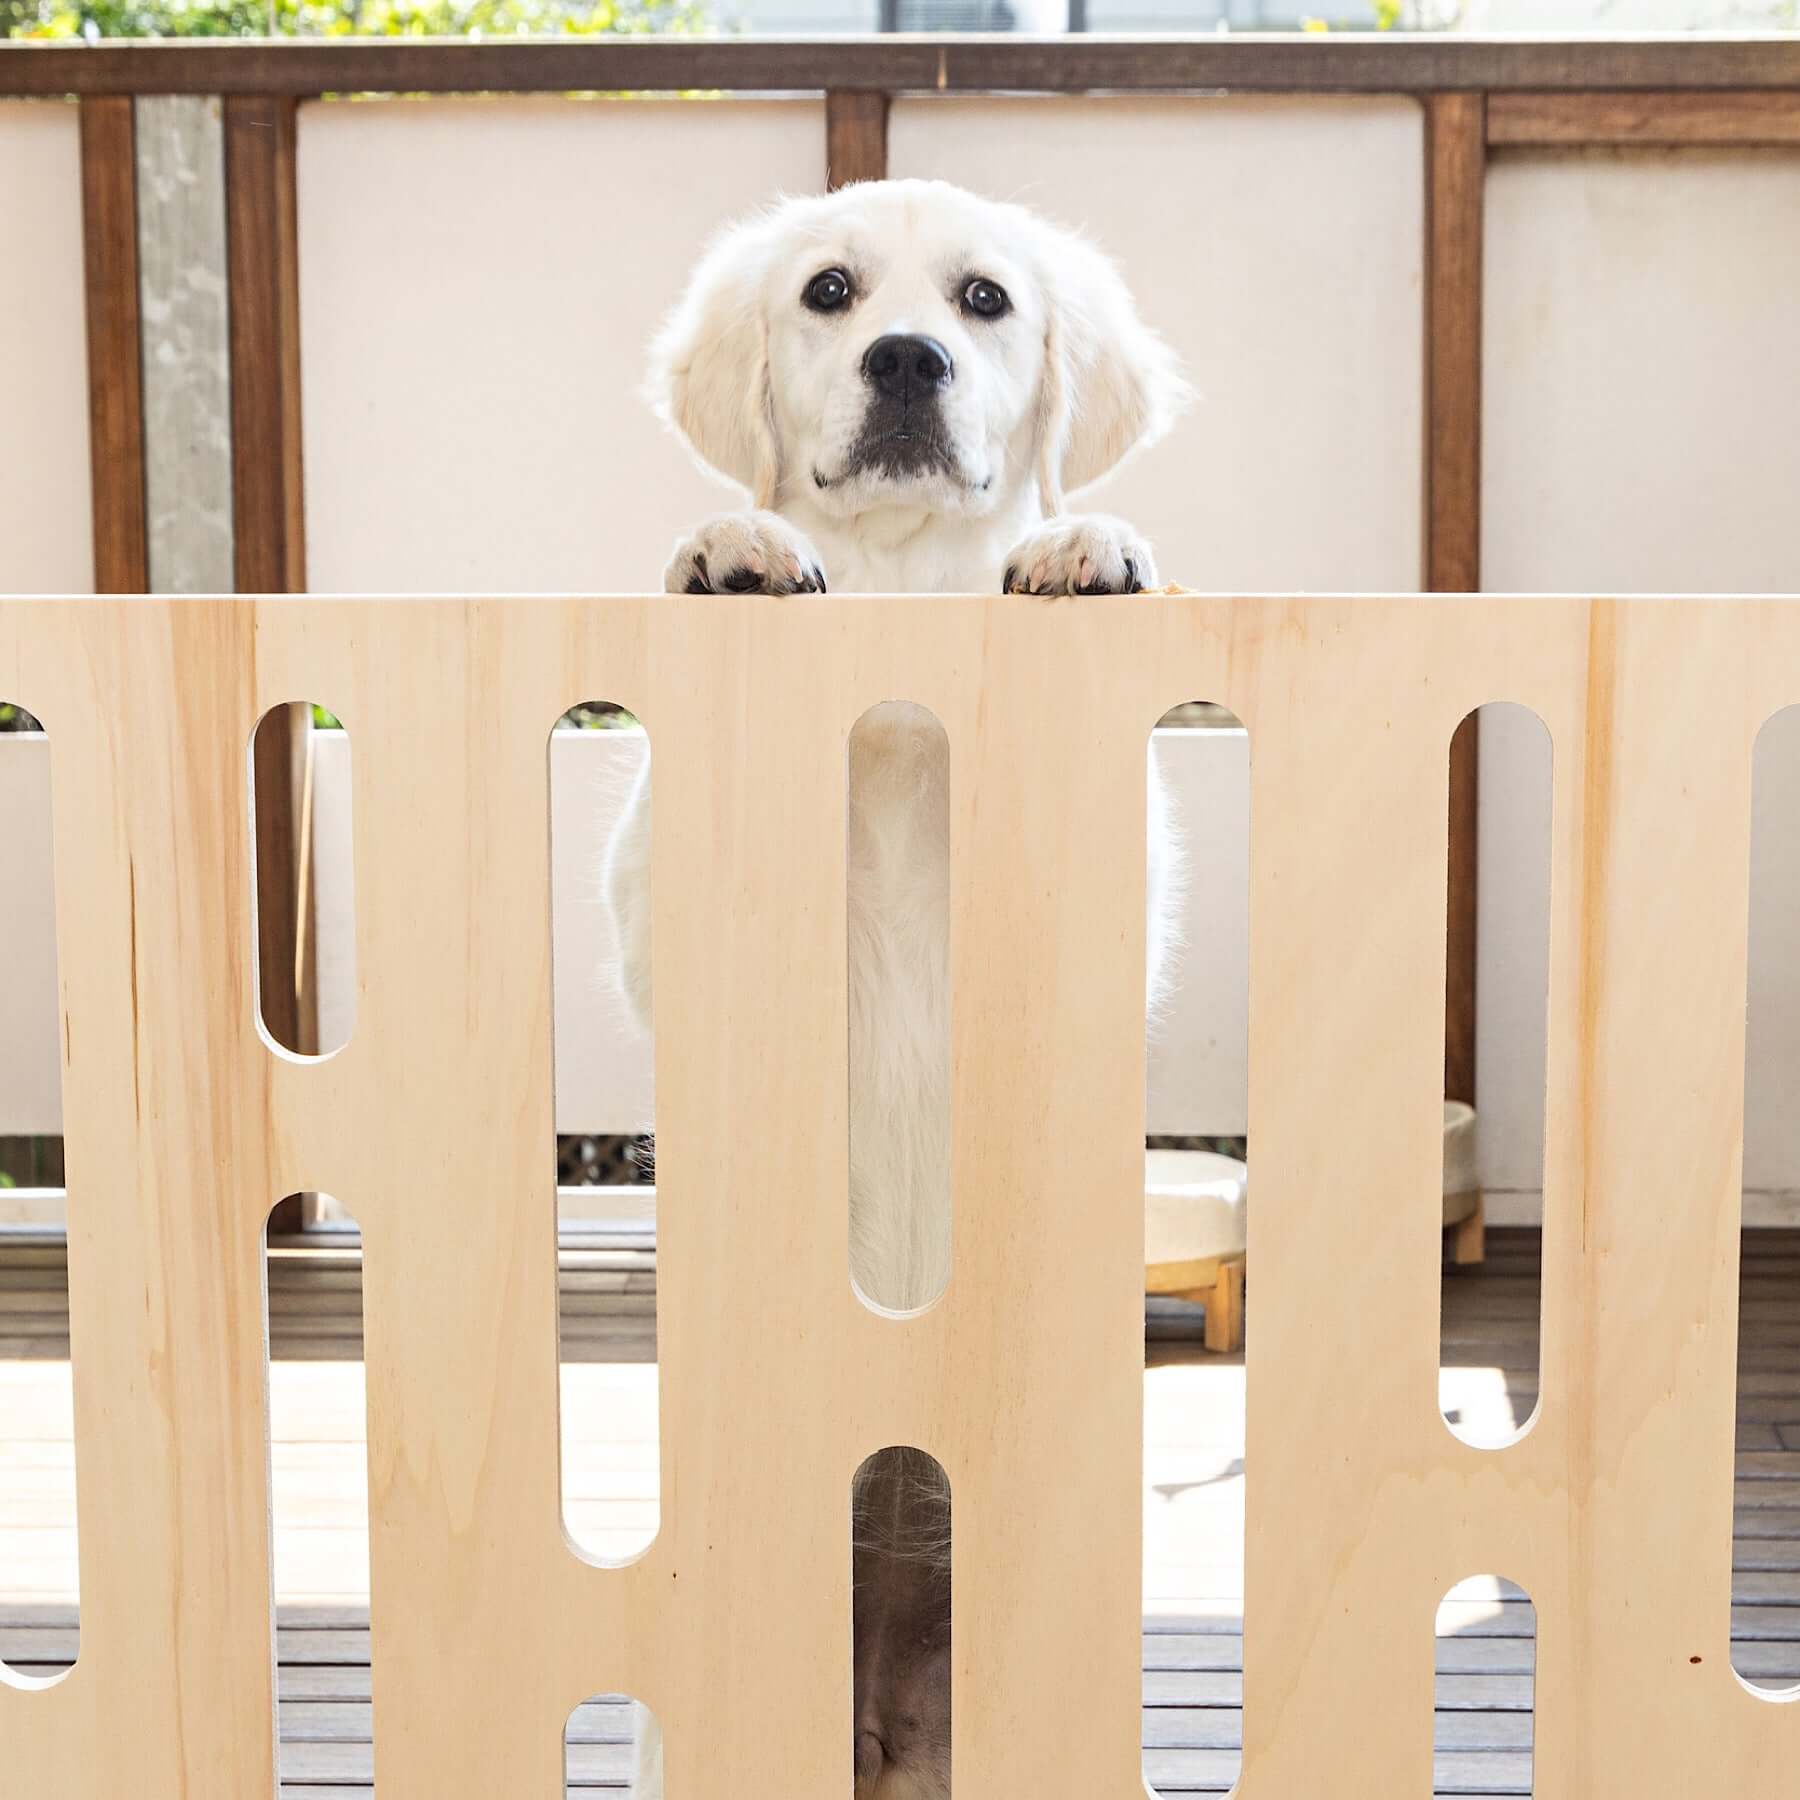 A puppy standing behind the 'Buddy The Modern Puppy Pen' made of wood